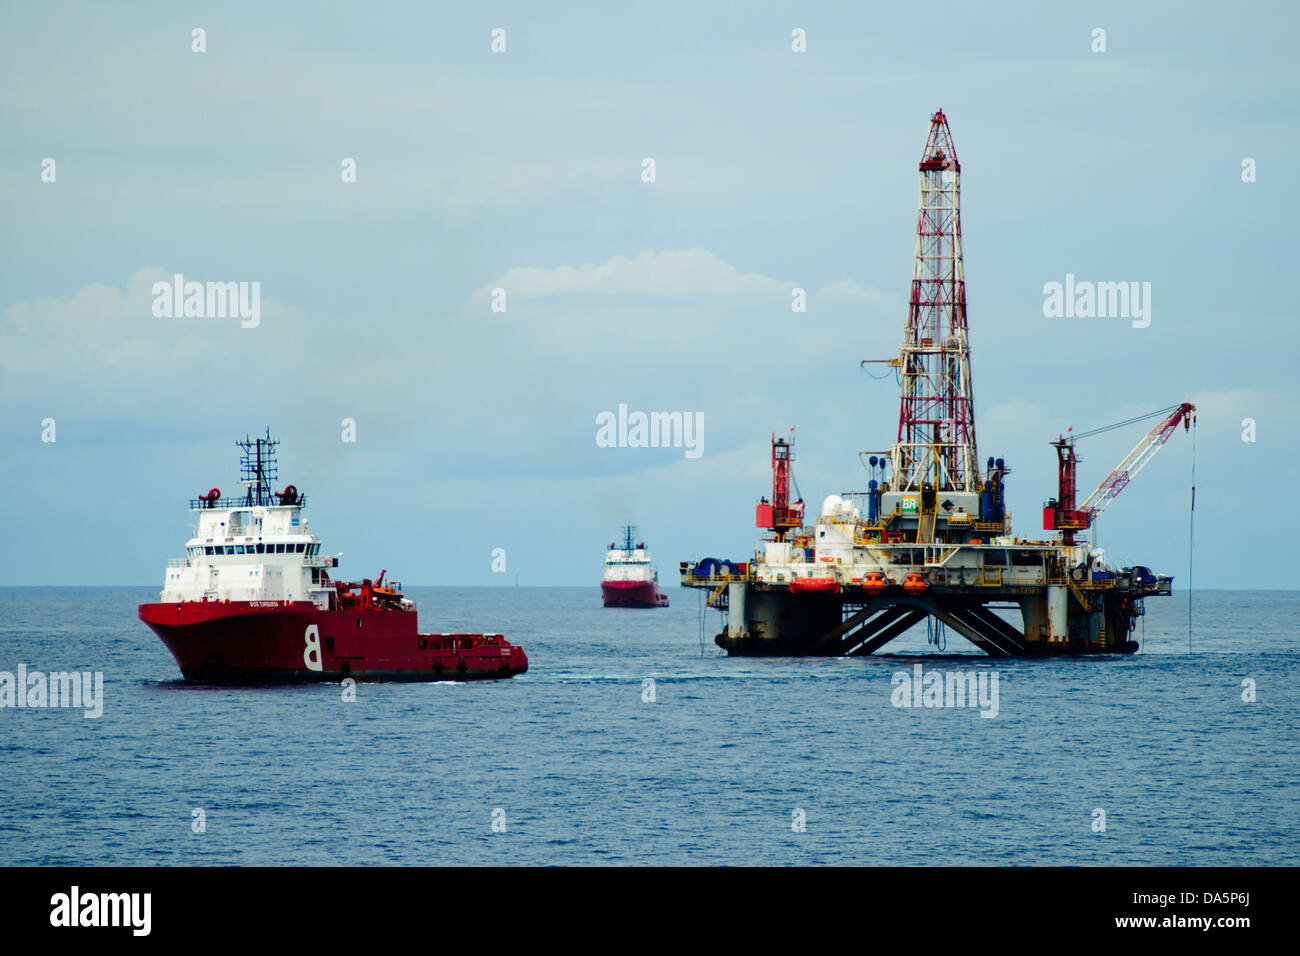 Supply vessel close to an offshore oil rig at campos basin, brazil Stock Photo